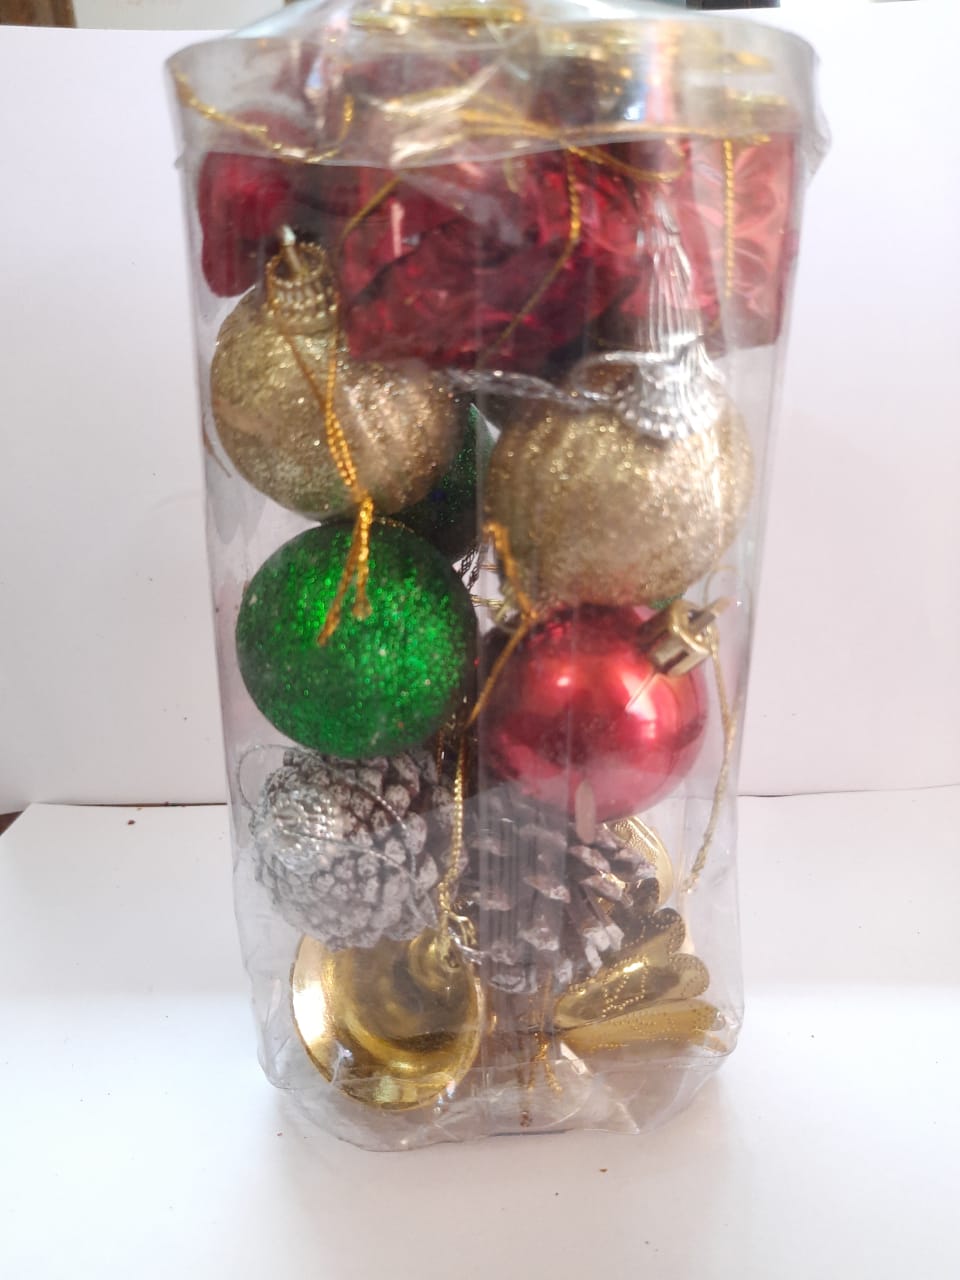 Christmas Tree Decoration - Assorted Gift Round Blister Box- BIG